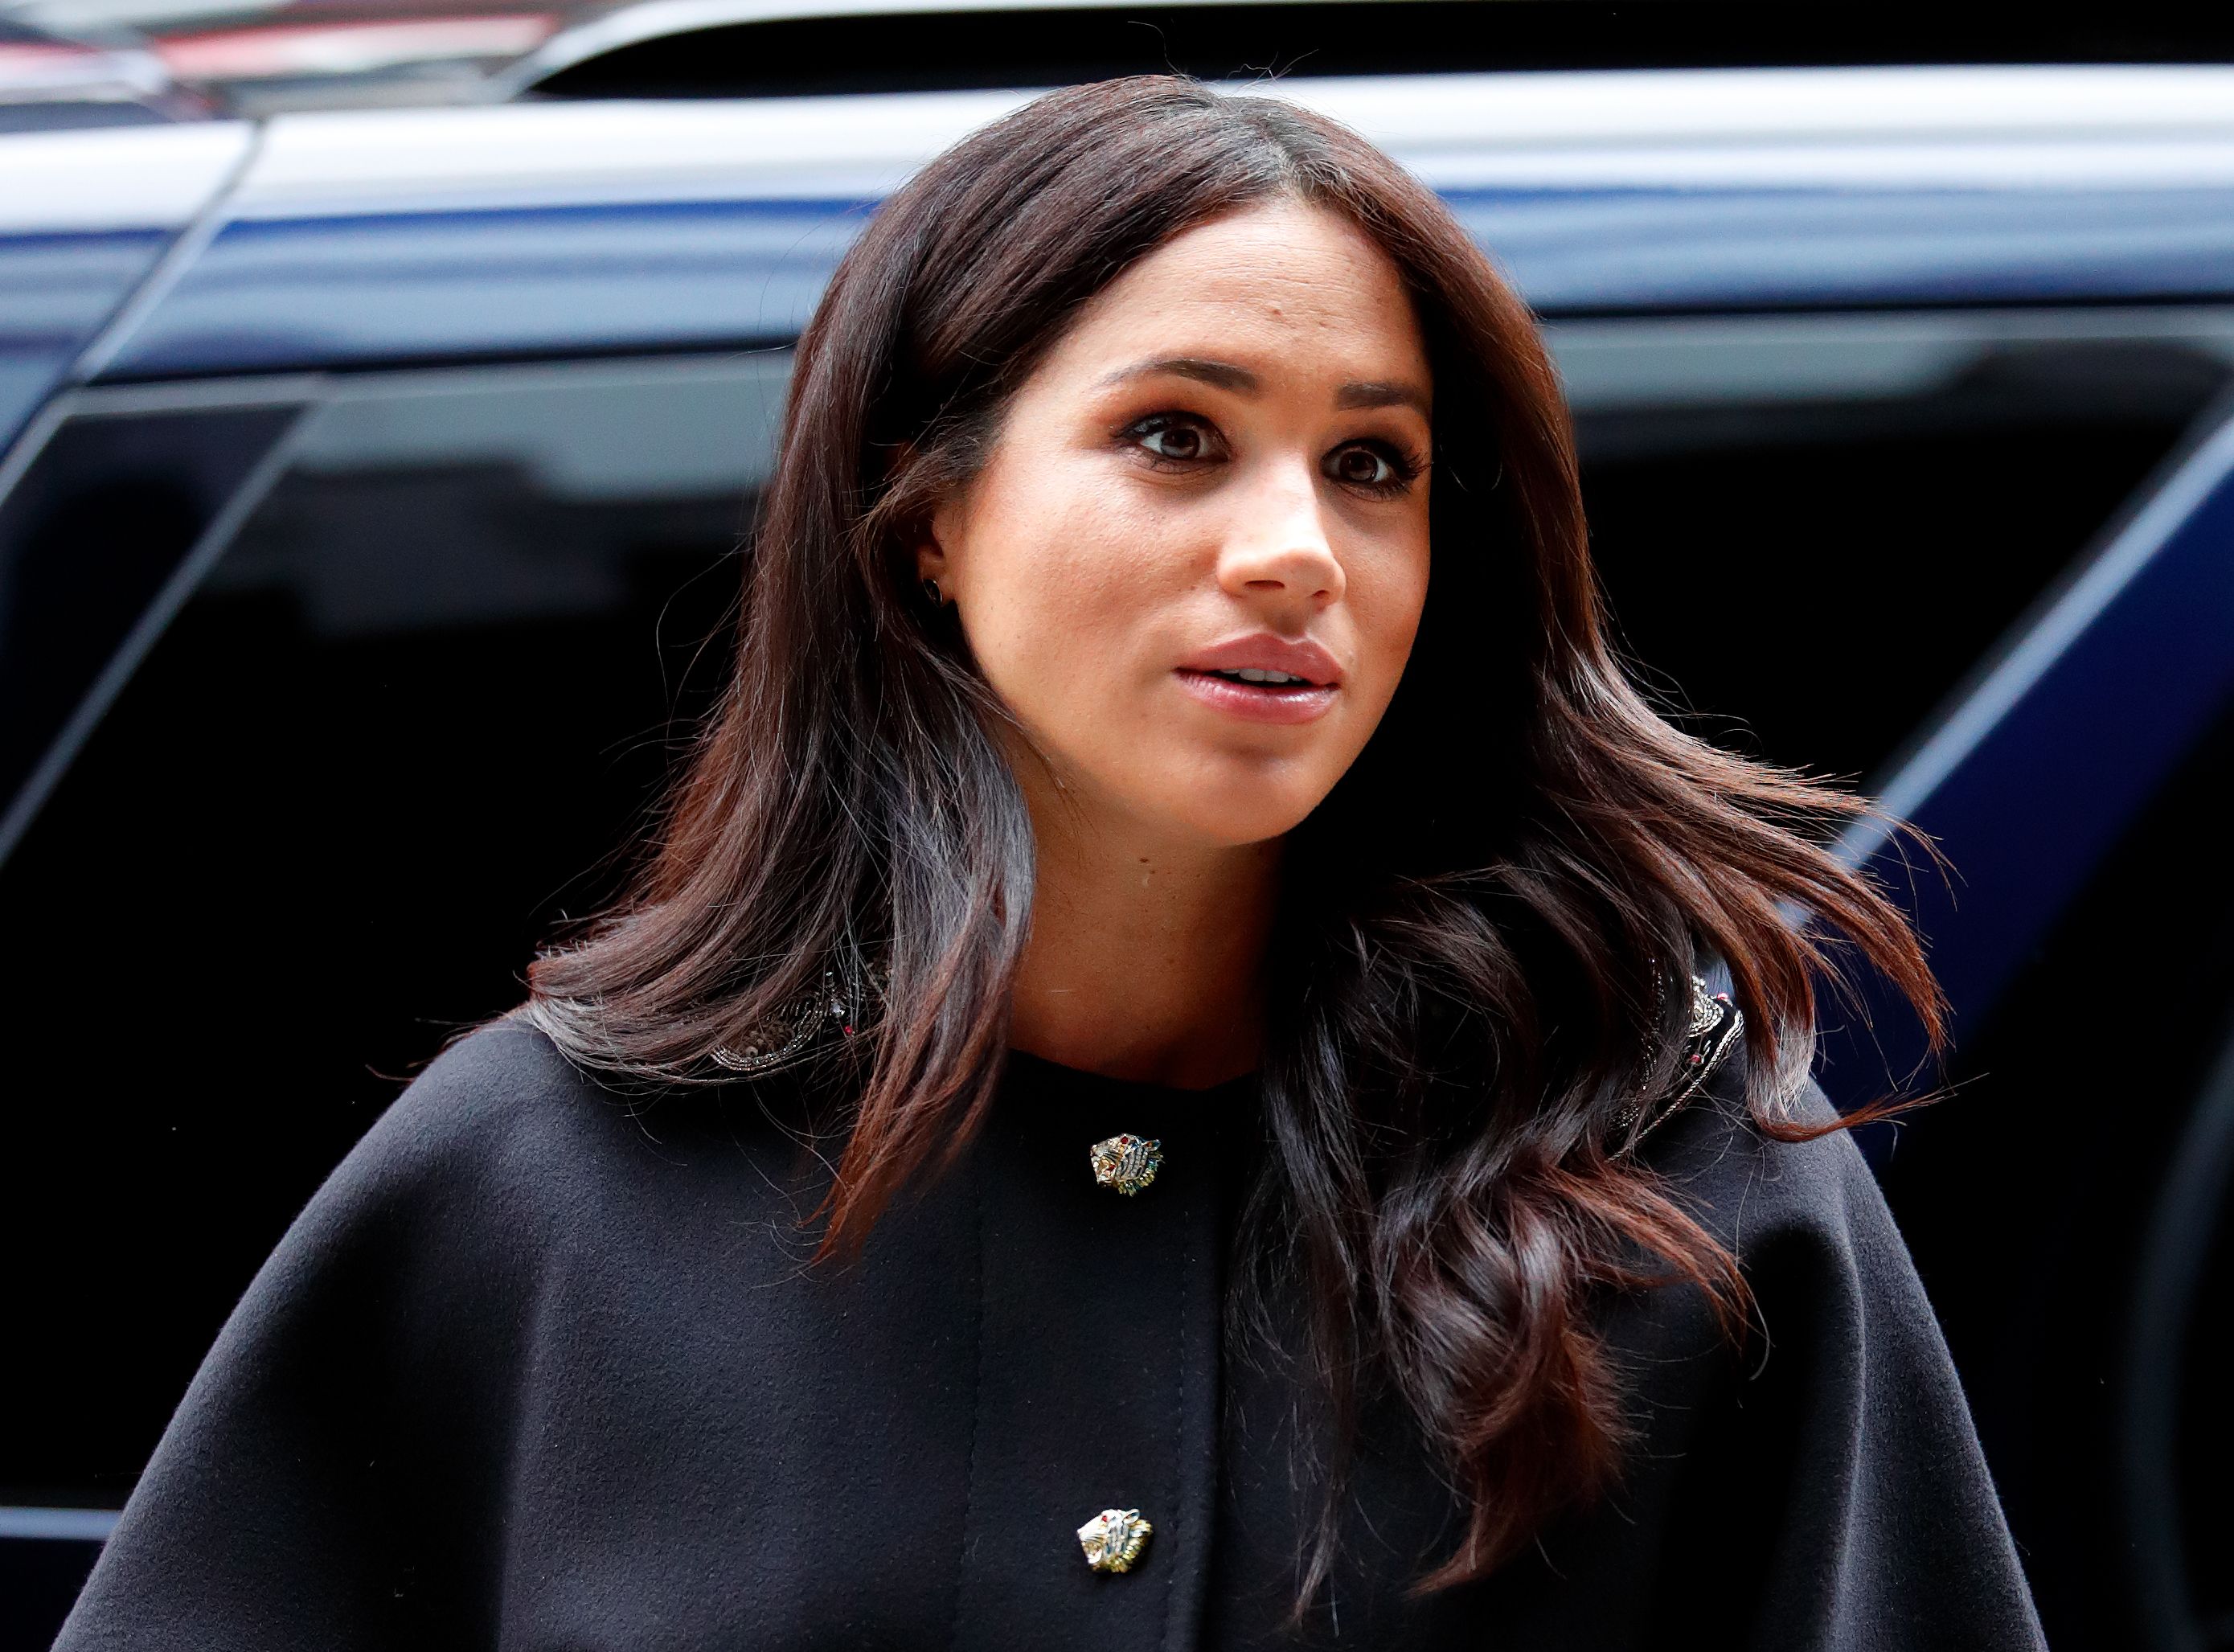 Meghan Markle at New Zealand House to sign a book of condolence on behalf of The Royal Family on March 19, 2019 | Photo: Getty Images